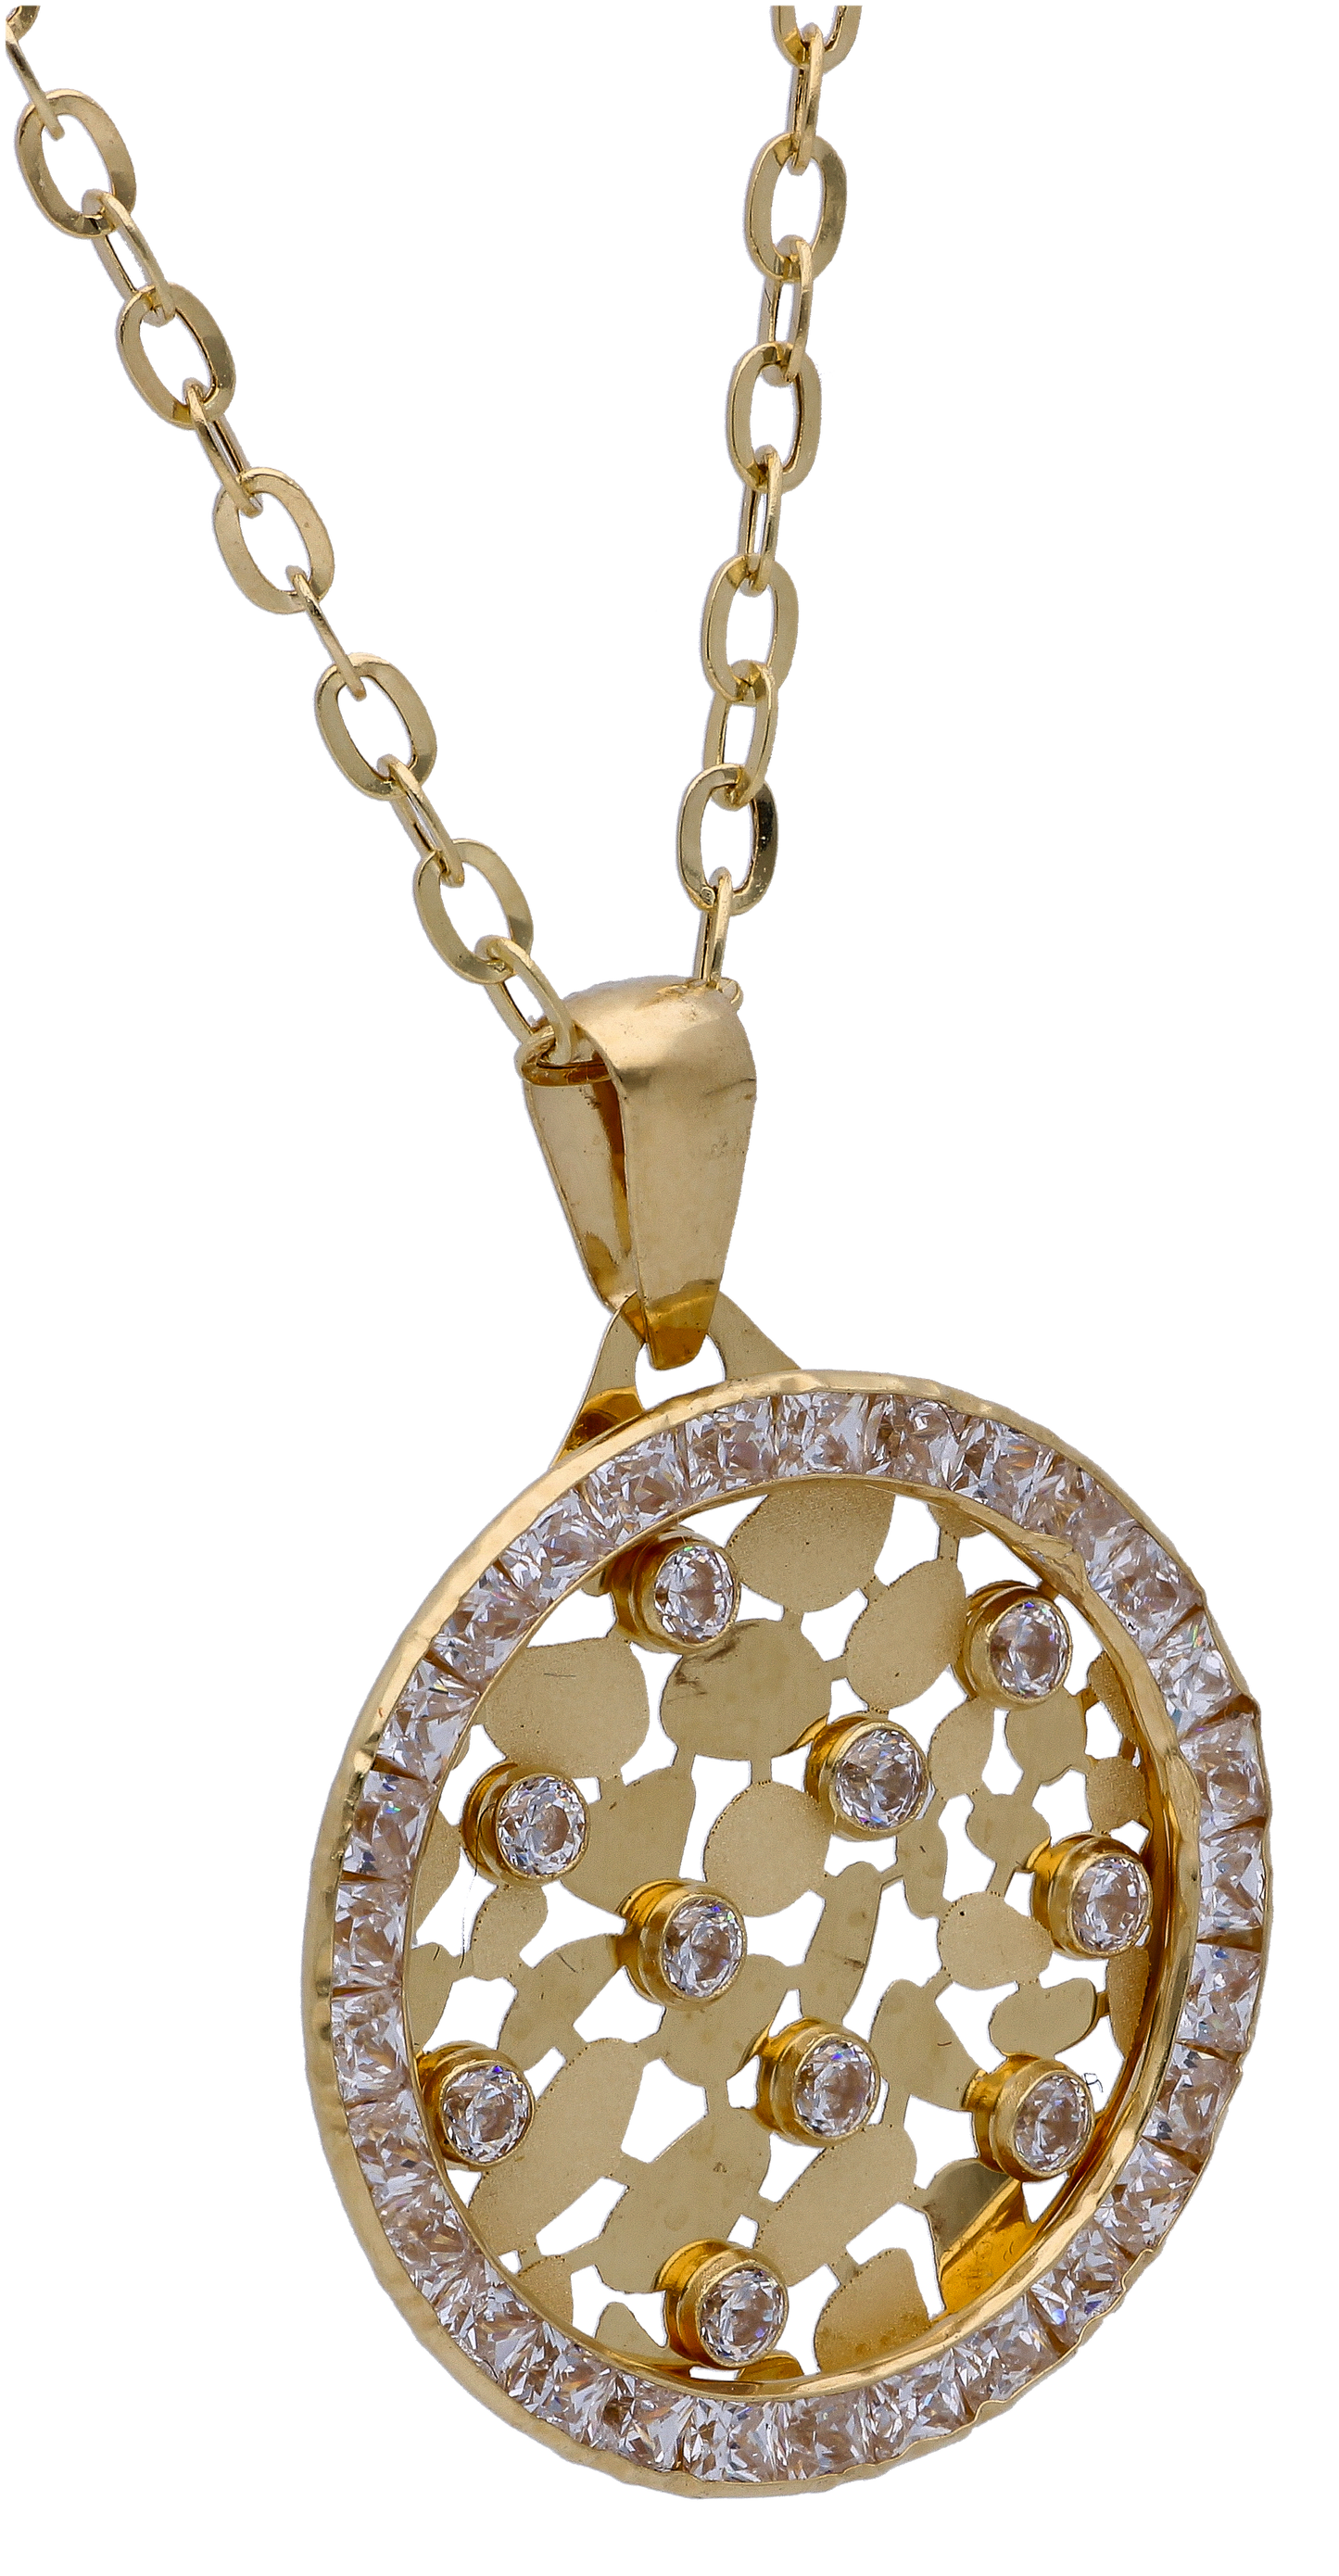 Gold Necklace (Chain with Zircon Gold Pendant) 18KT - FKJNKL18KU6296